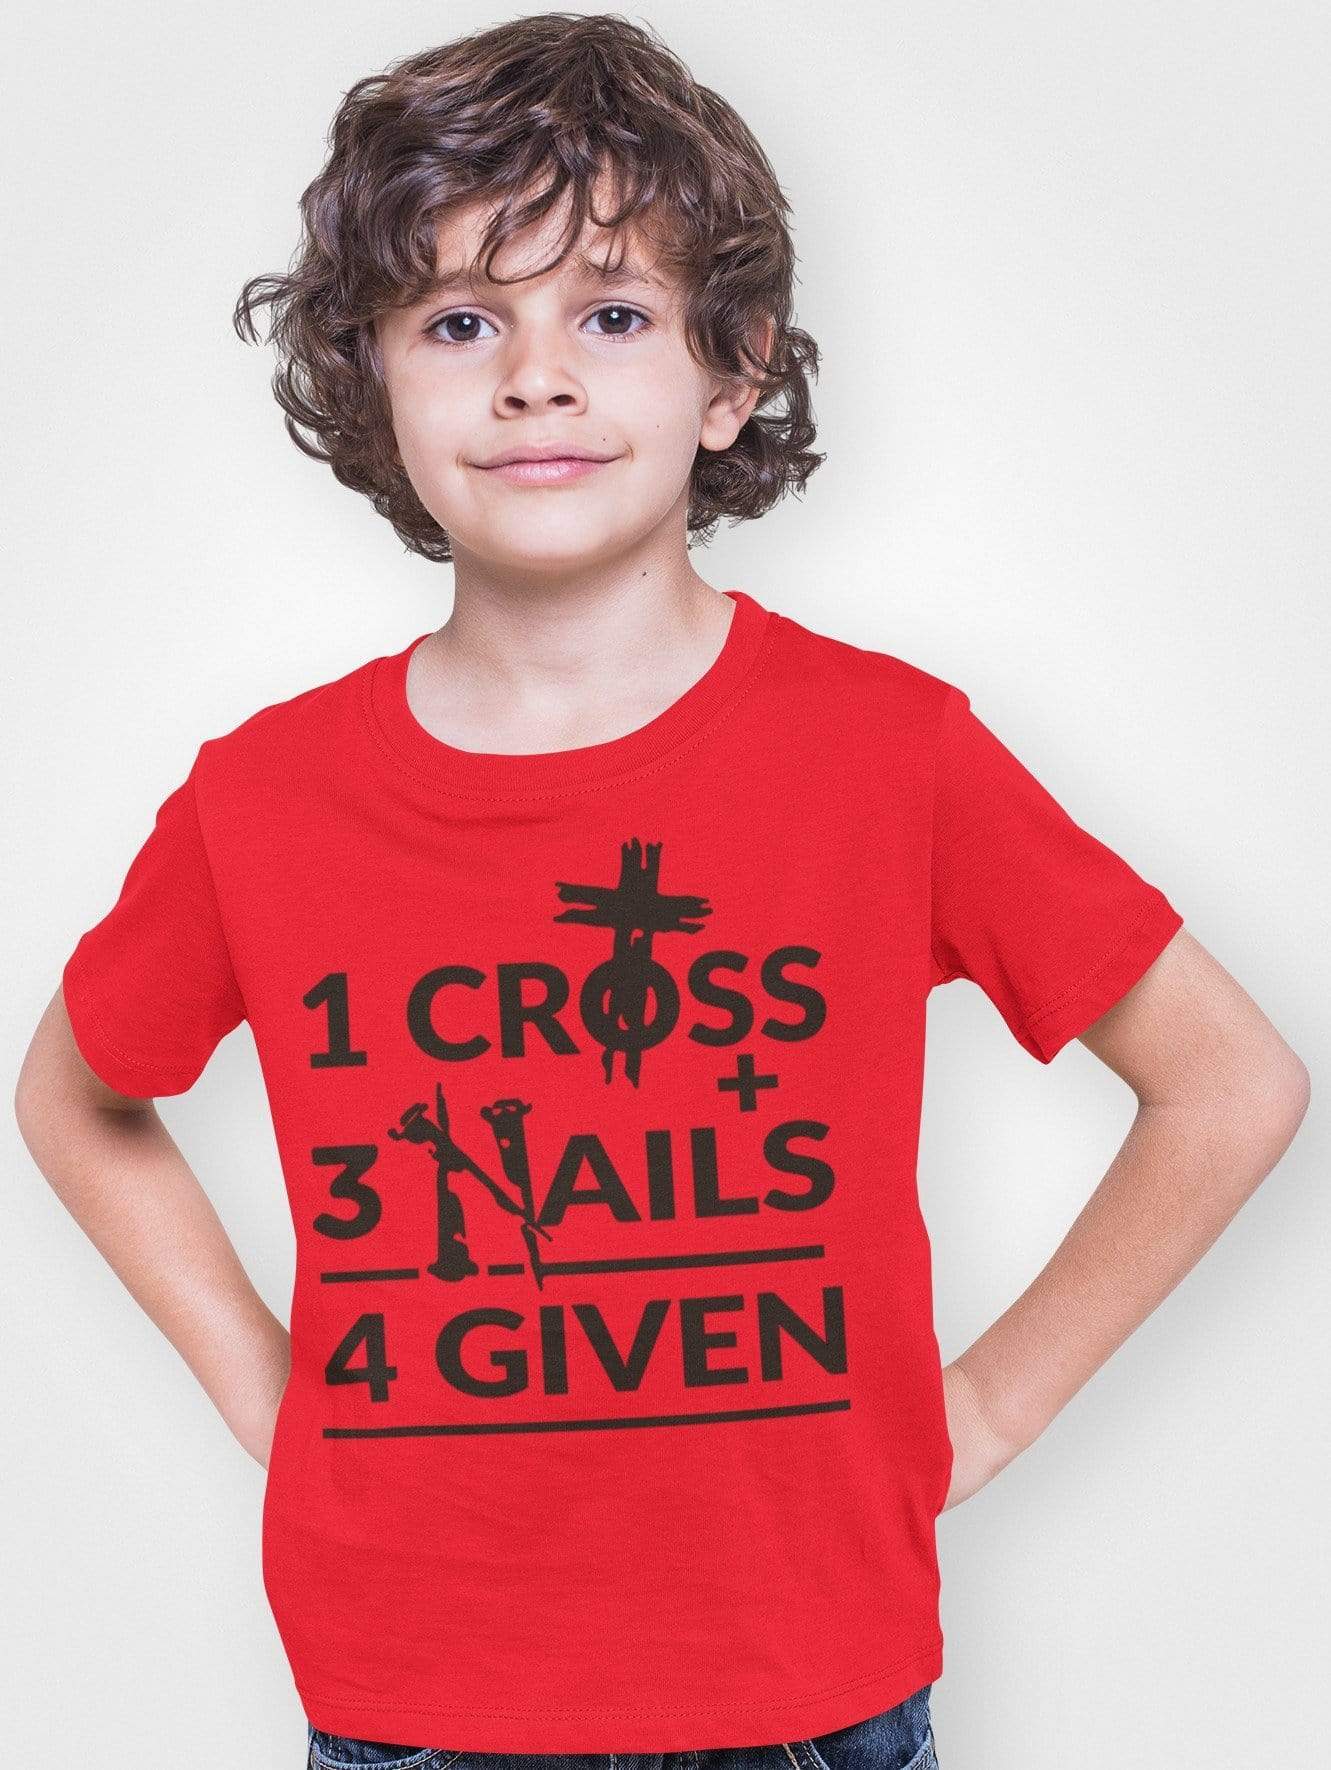 Living Words Kids Round Neck T Shirt Boy / 0-12 Mn / Red 1cross,3nails,4given